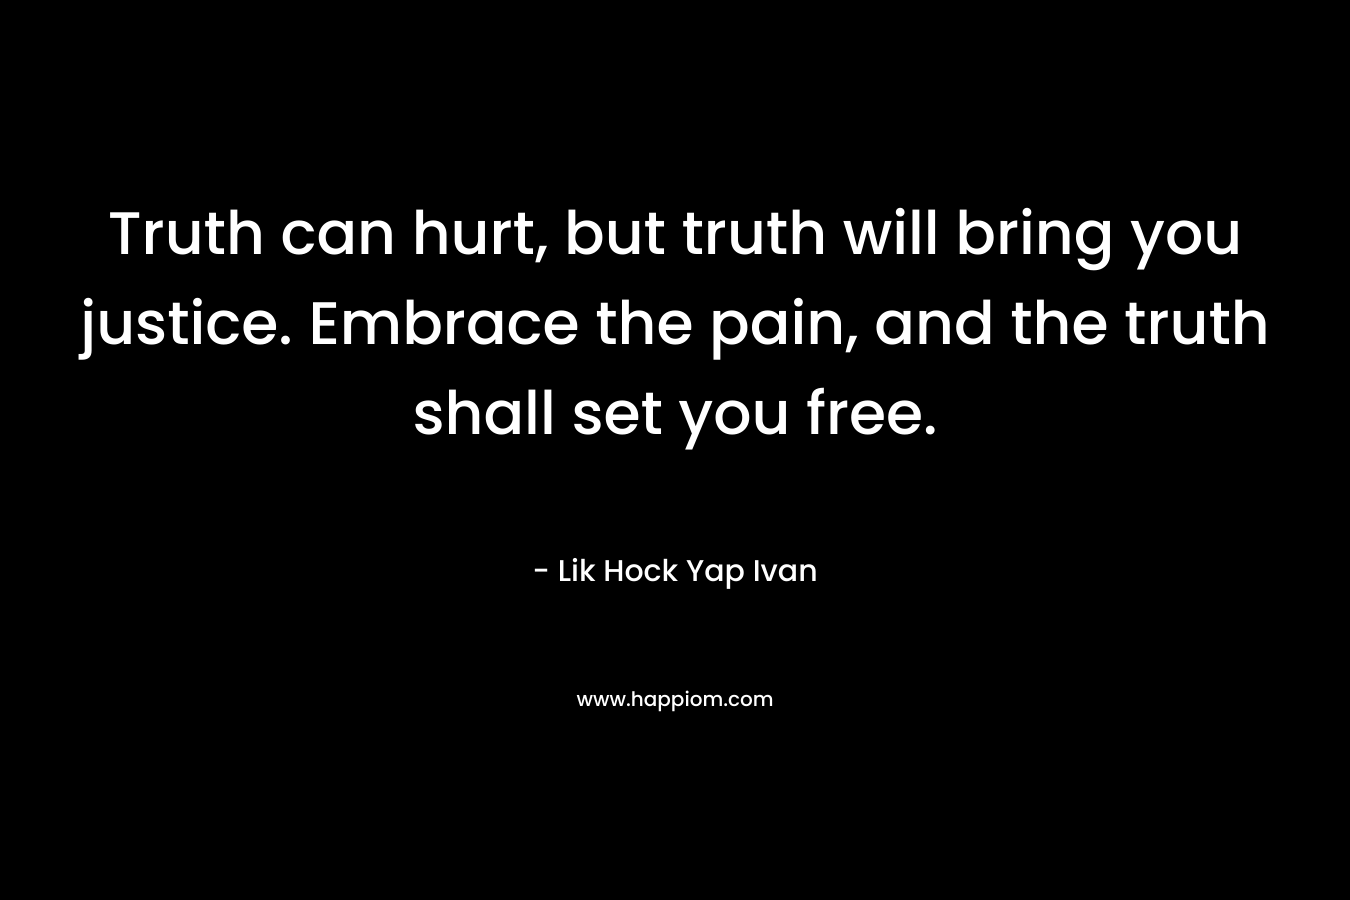 Truth can hurt, but truth will bring you justice. Embrace the pain, and the truth shall set you free.